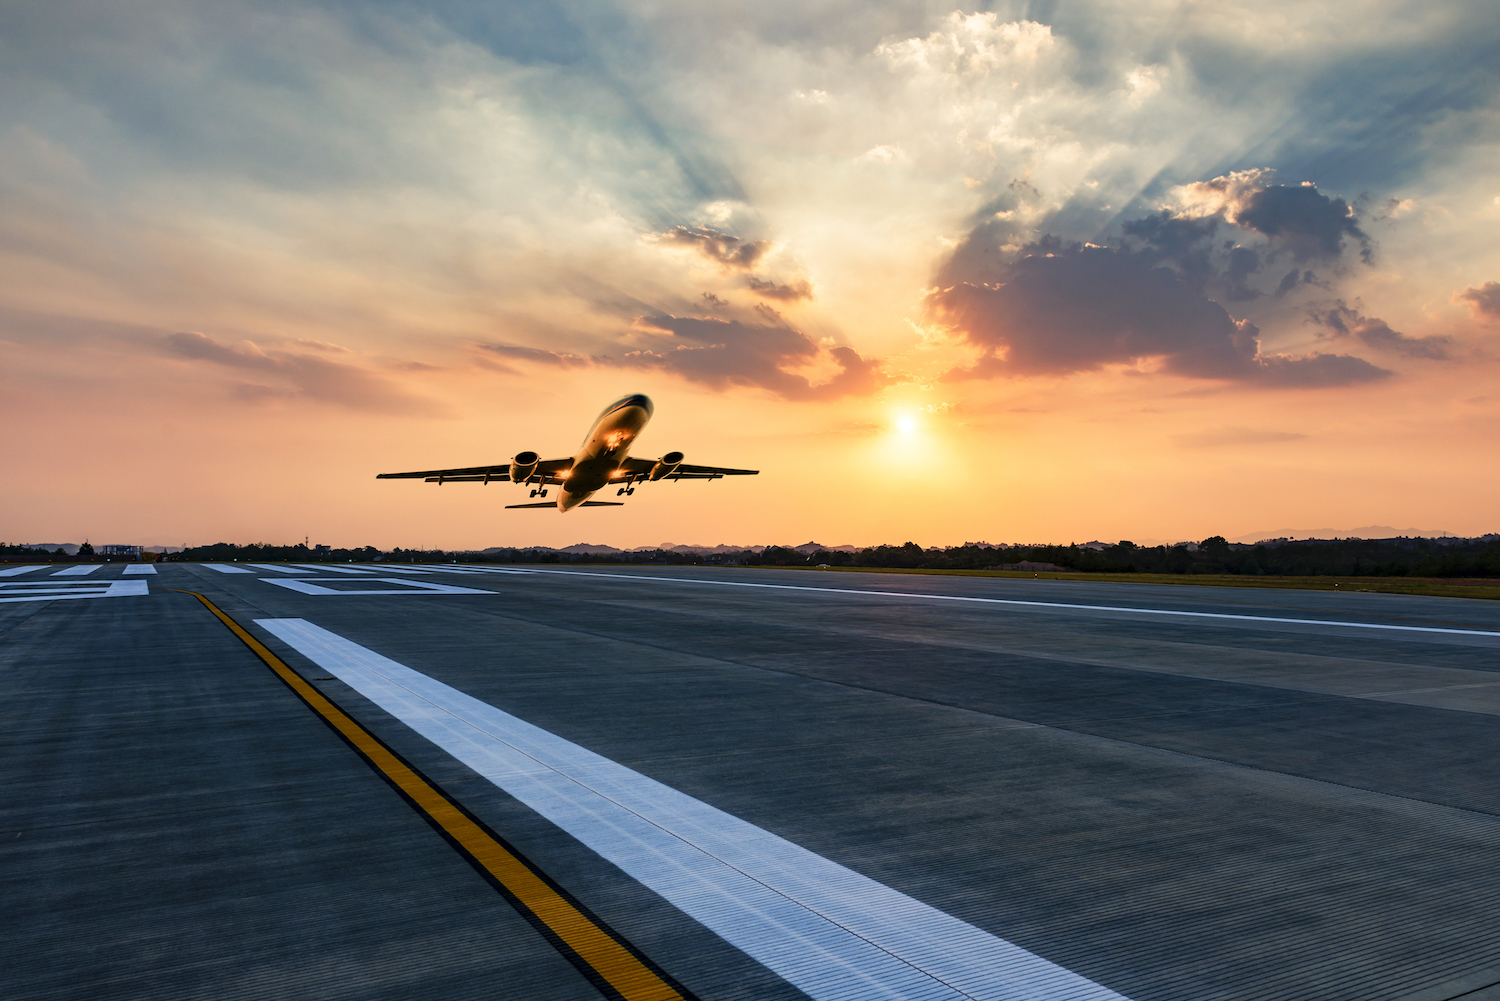 Aion Token Project Estimates 18-Month Runway After Bitcoin And Ether Sales